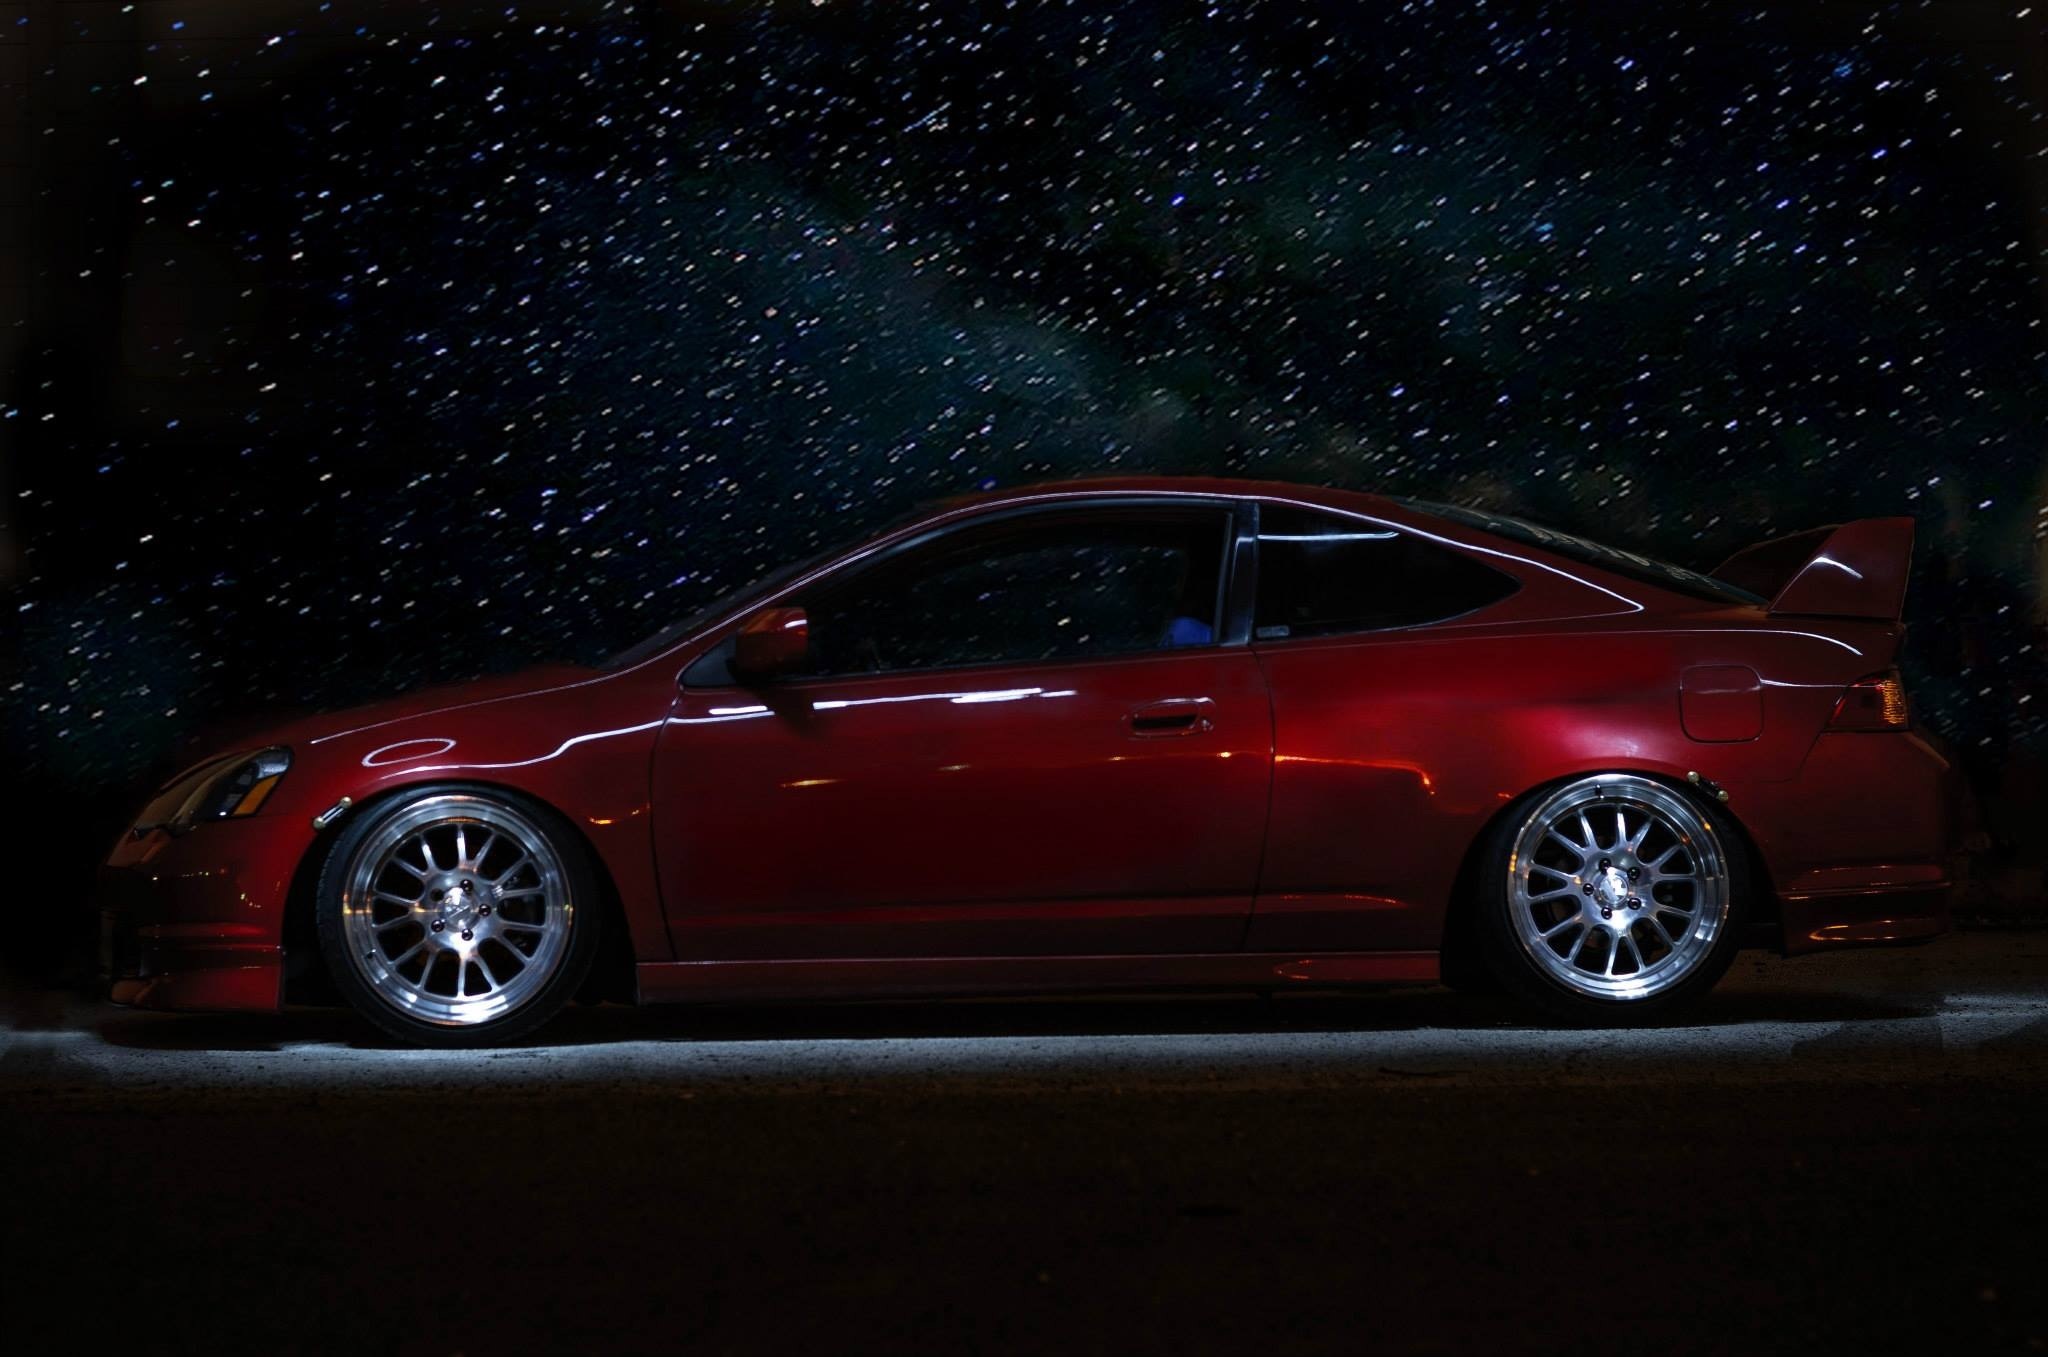 Rsx-s up in the sky